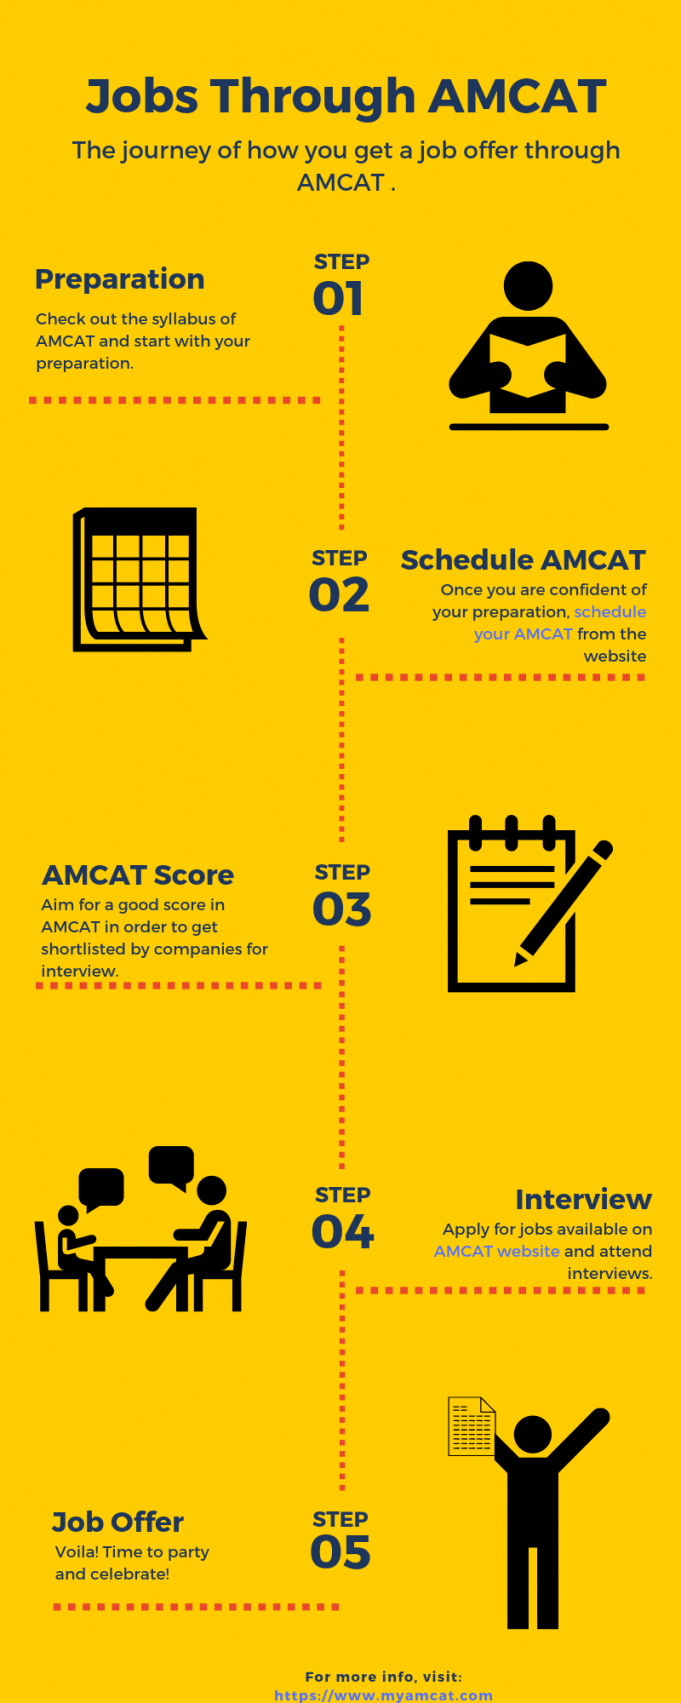 How to apply for jobs through amcat